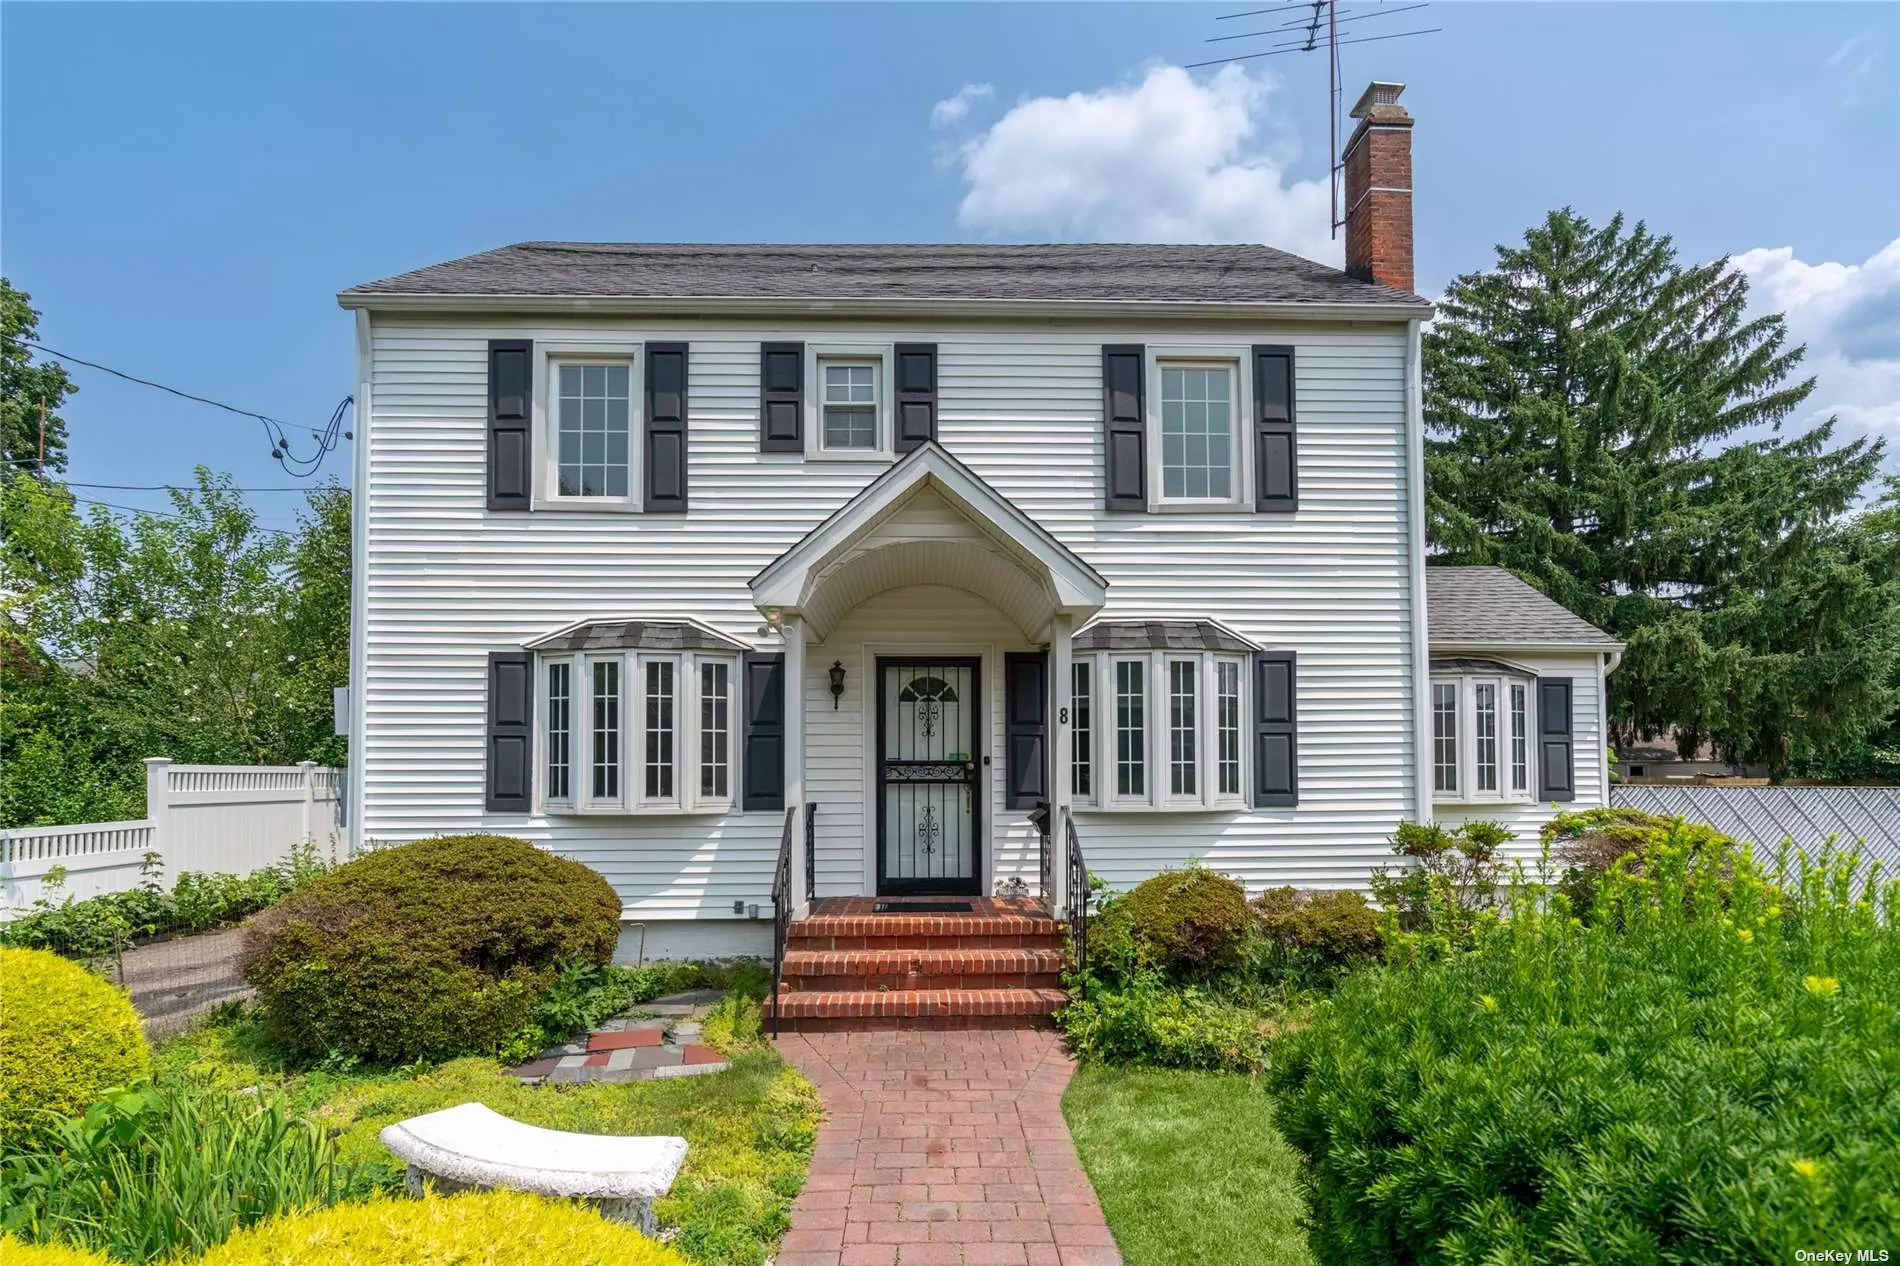 This lovely 4 bedroom home is set on an oversized flat sunny fully fenced property in the desirable neighborhood of Syosset. This traditional Colonial offers many possibilities for today&rsquo;s living. A perfect location for commuting on the train, local transportation and plenty of shopping and restaurants to enjoy. There is a walk-up attic as well as a full basement and a detached two car garage. Award winning Syosset school district #2. Do not miss this opportunity.